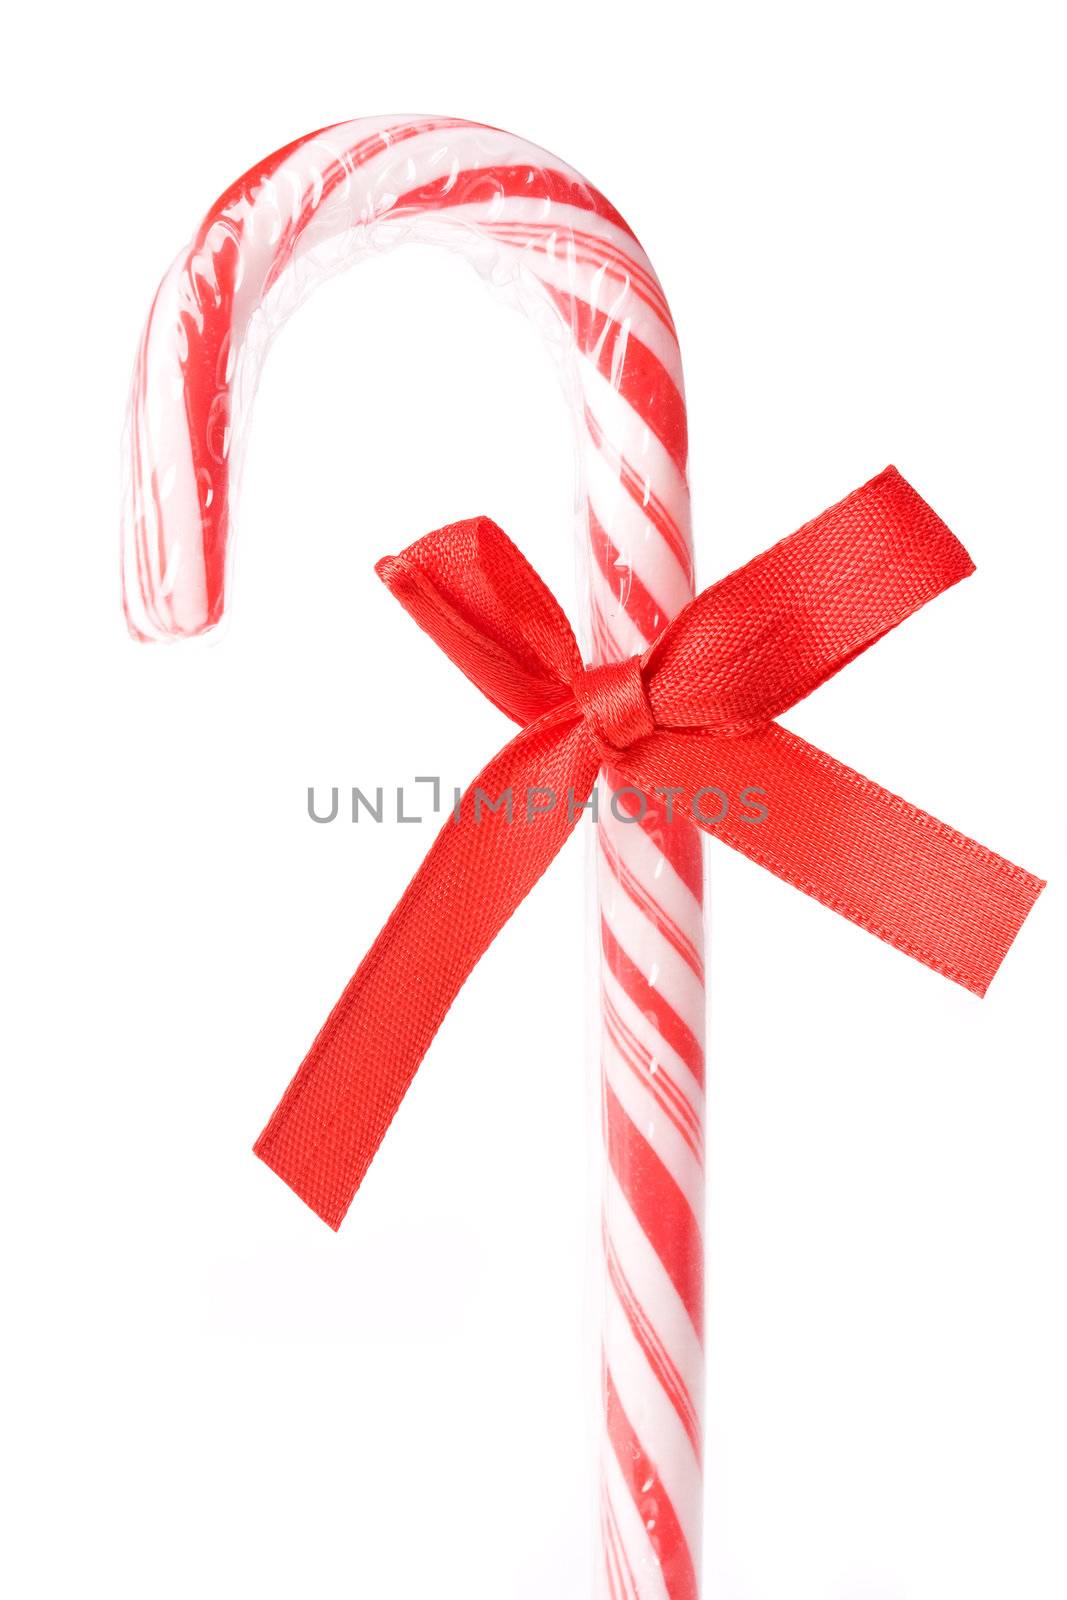 candy canes isolated on white background by bernjuer